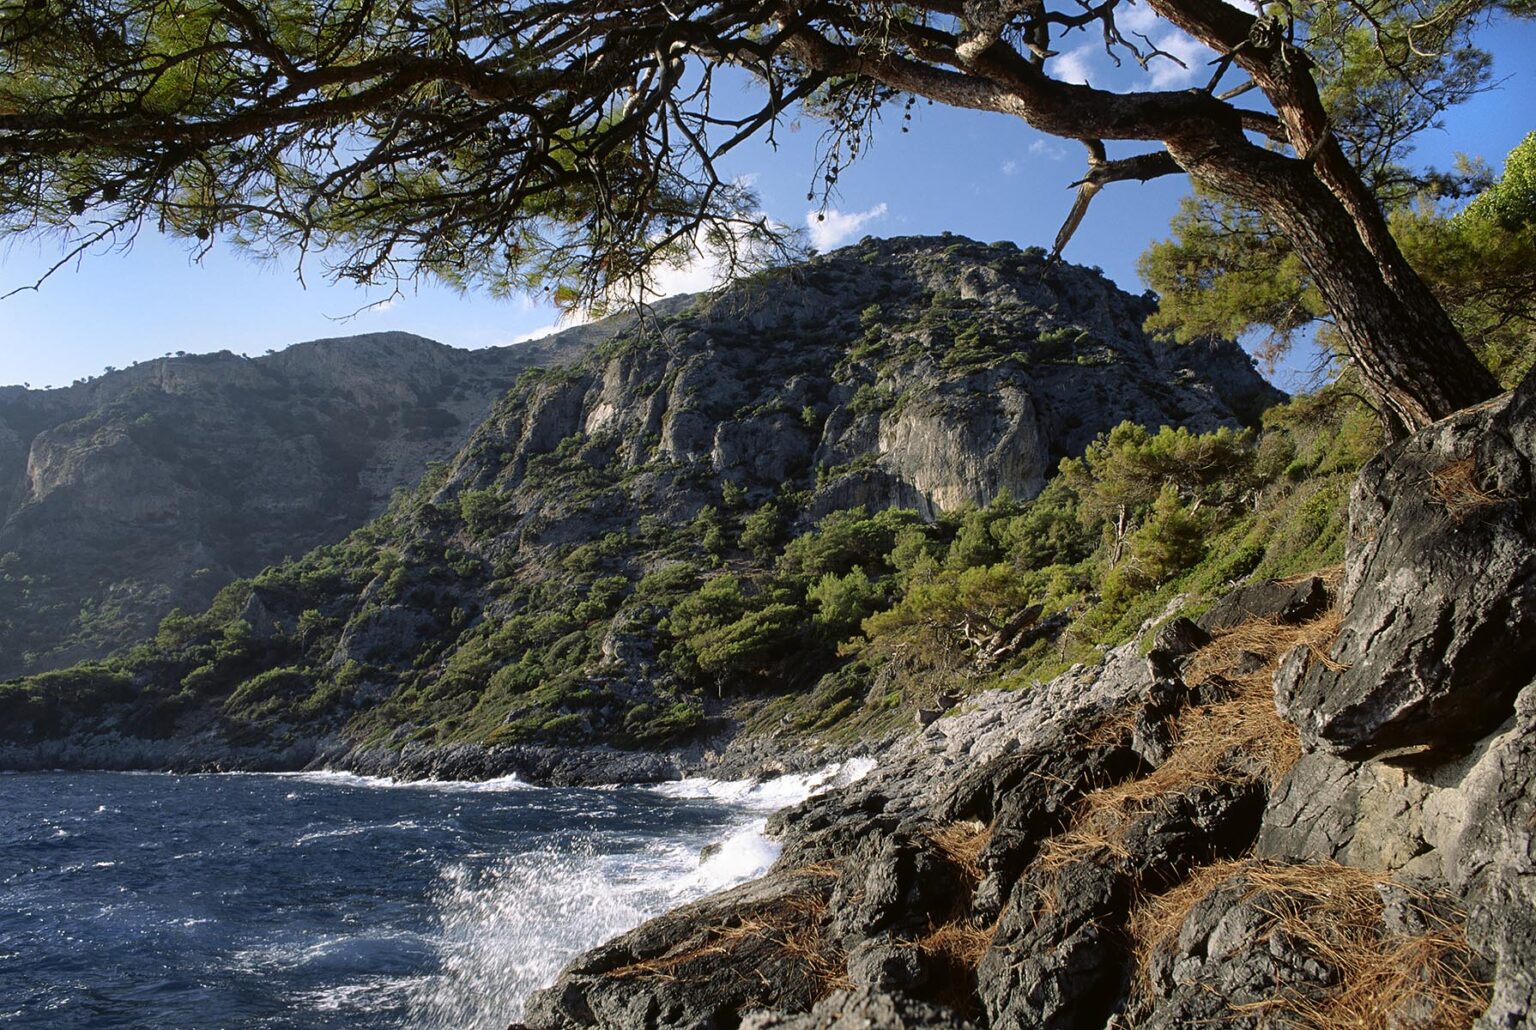 A Red pine clings to the rocks above the azure waters of GUNGORMEZ LIMANI BAY - TURQUOISE COAST, TURKEY